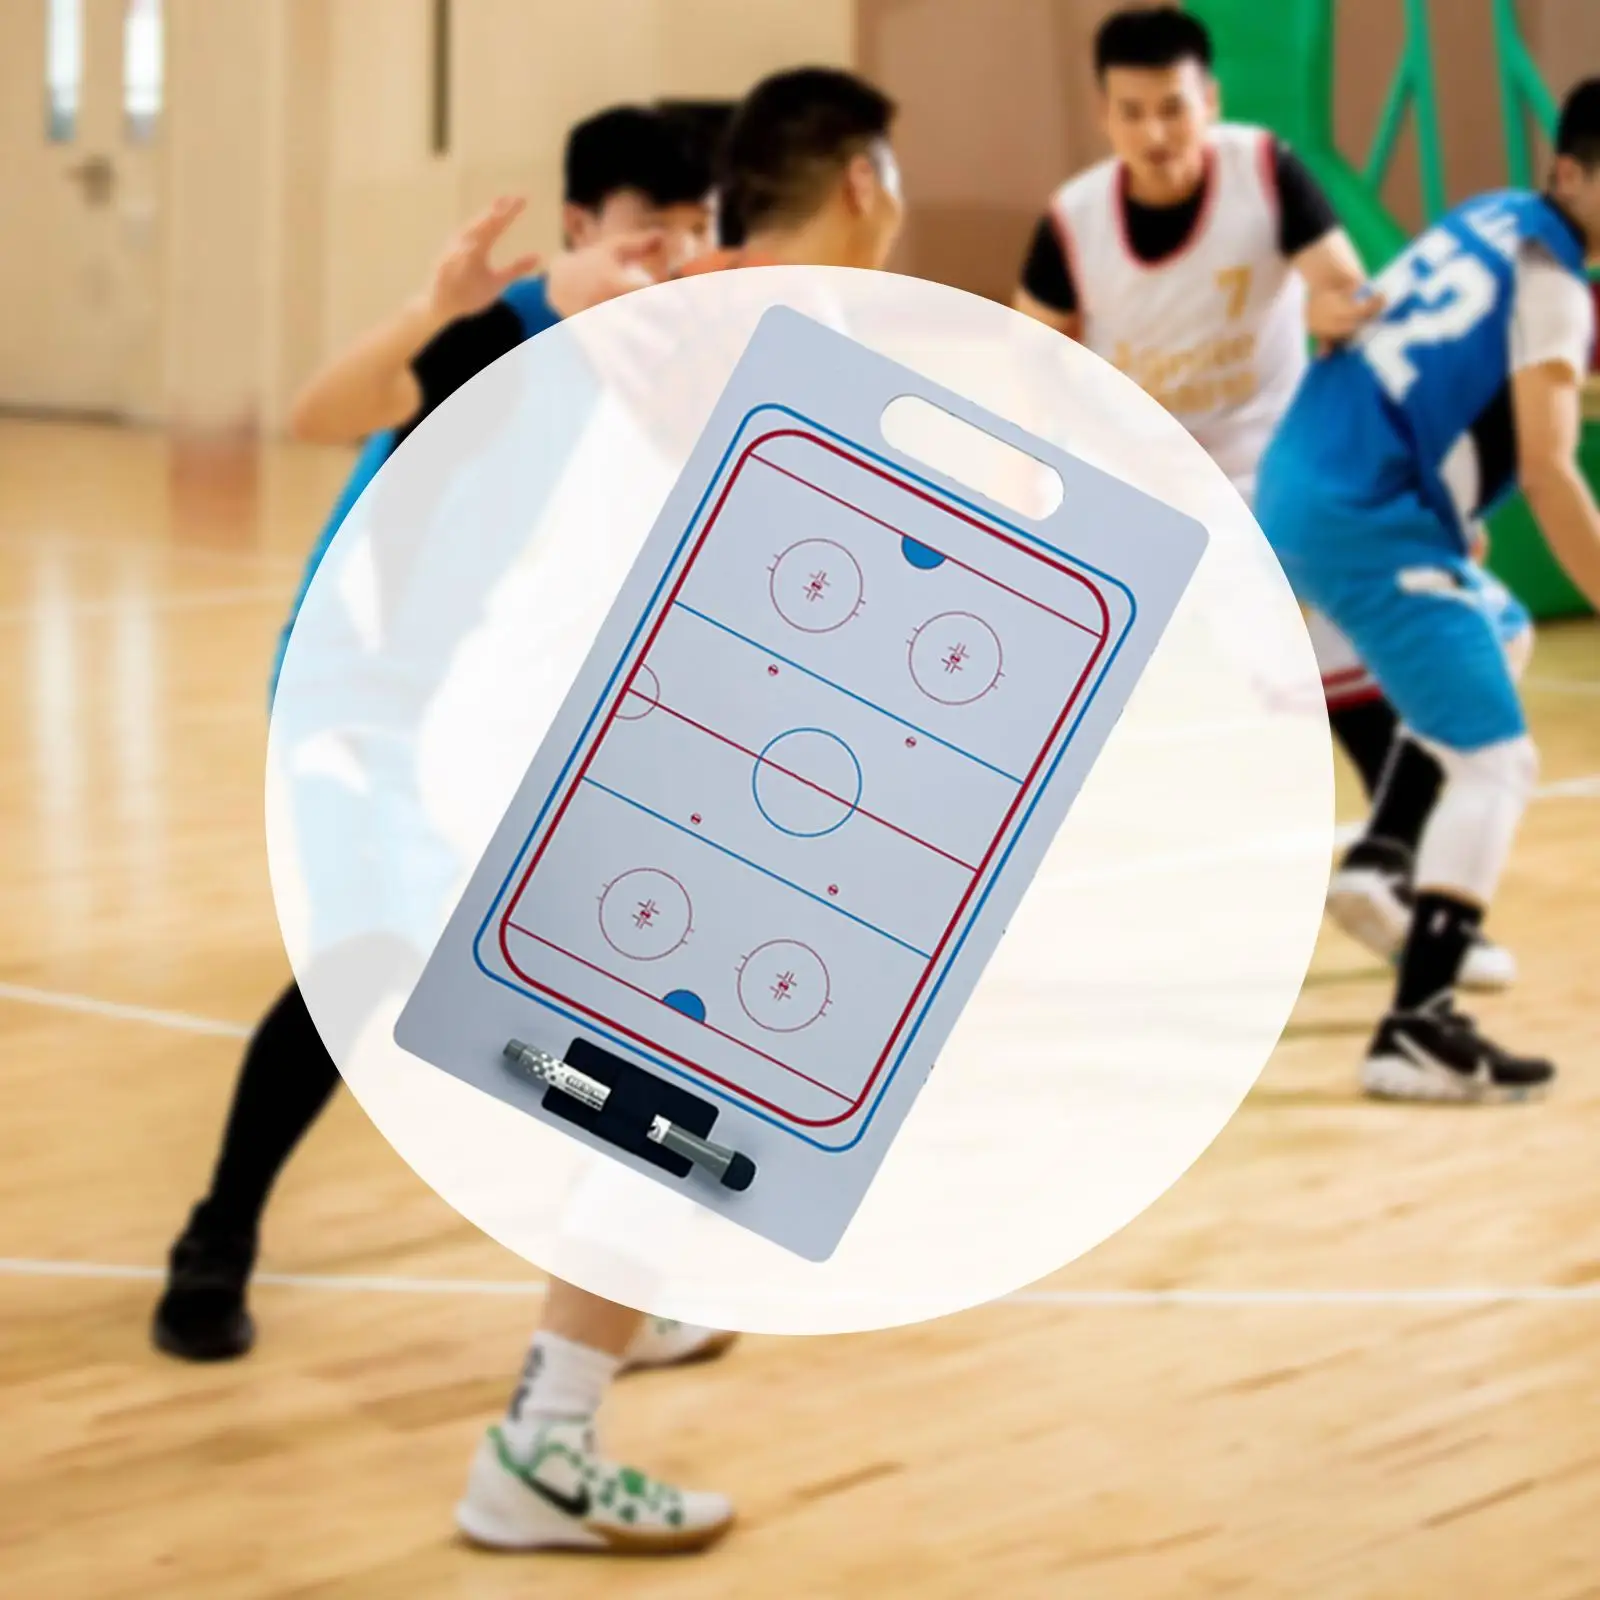 Hockey Coaching Boards Practice Board Football Teaching Assistant Game with Marker Pen Soccer Coaches Strategy Tactic Clipboard